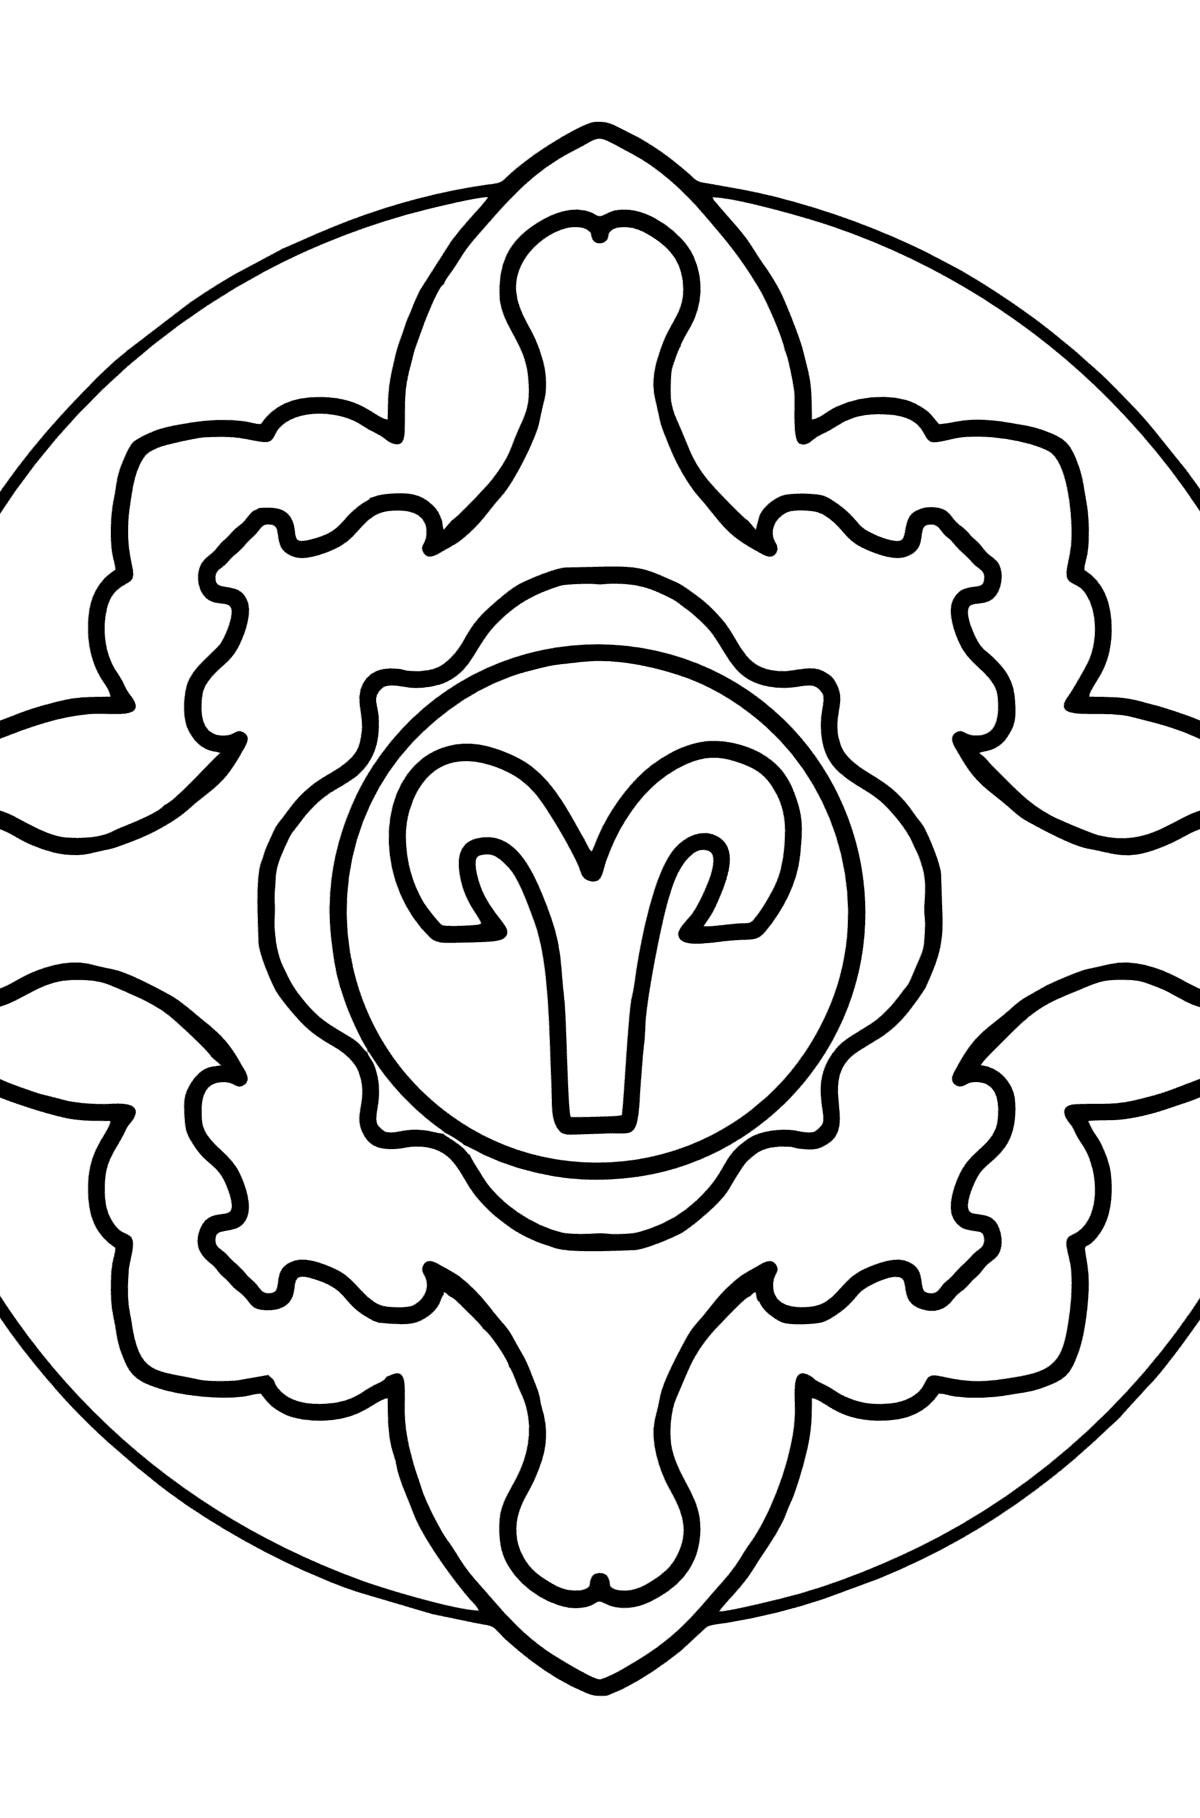 Coloring page - zodiac sign Aries - Coloring Pages for Kids